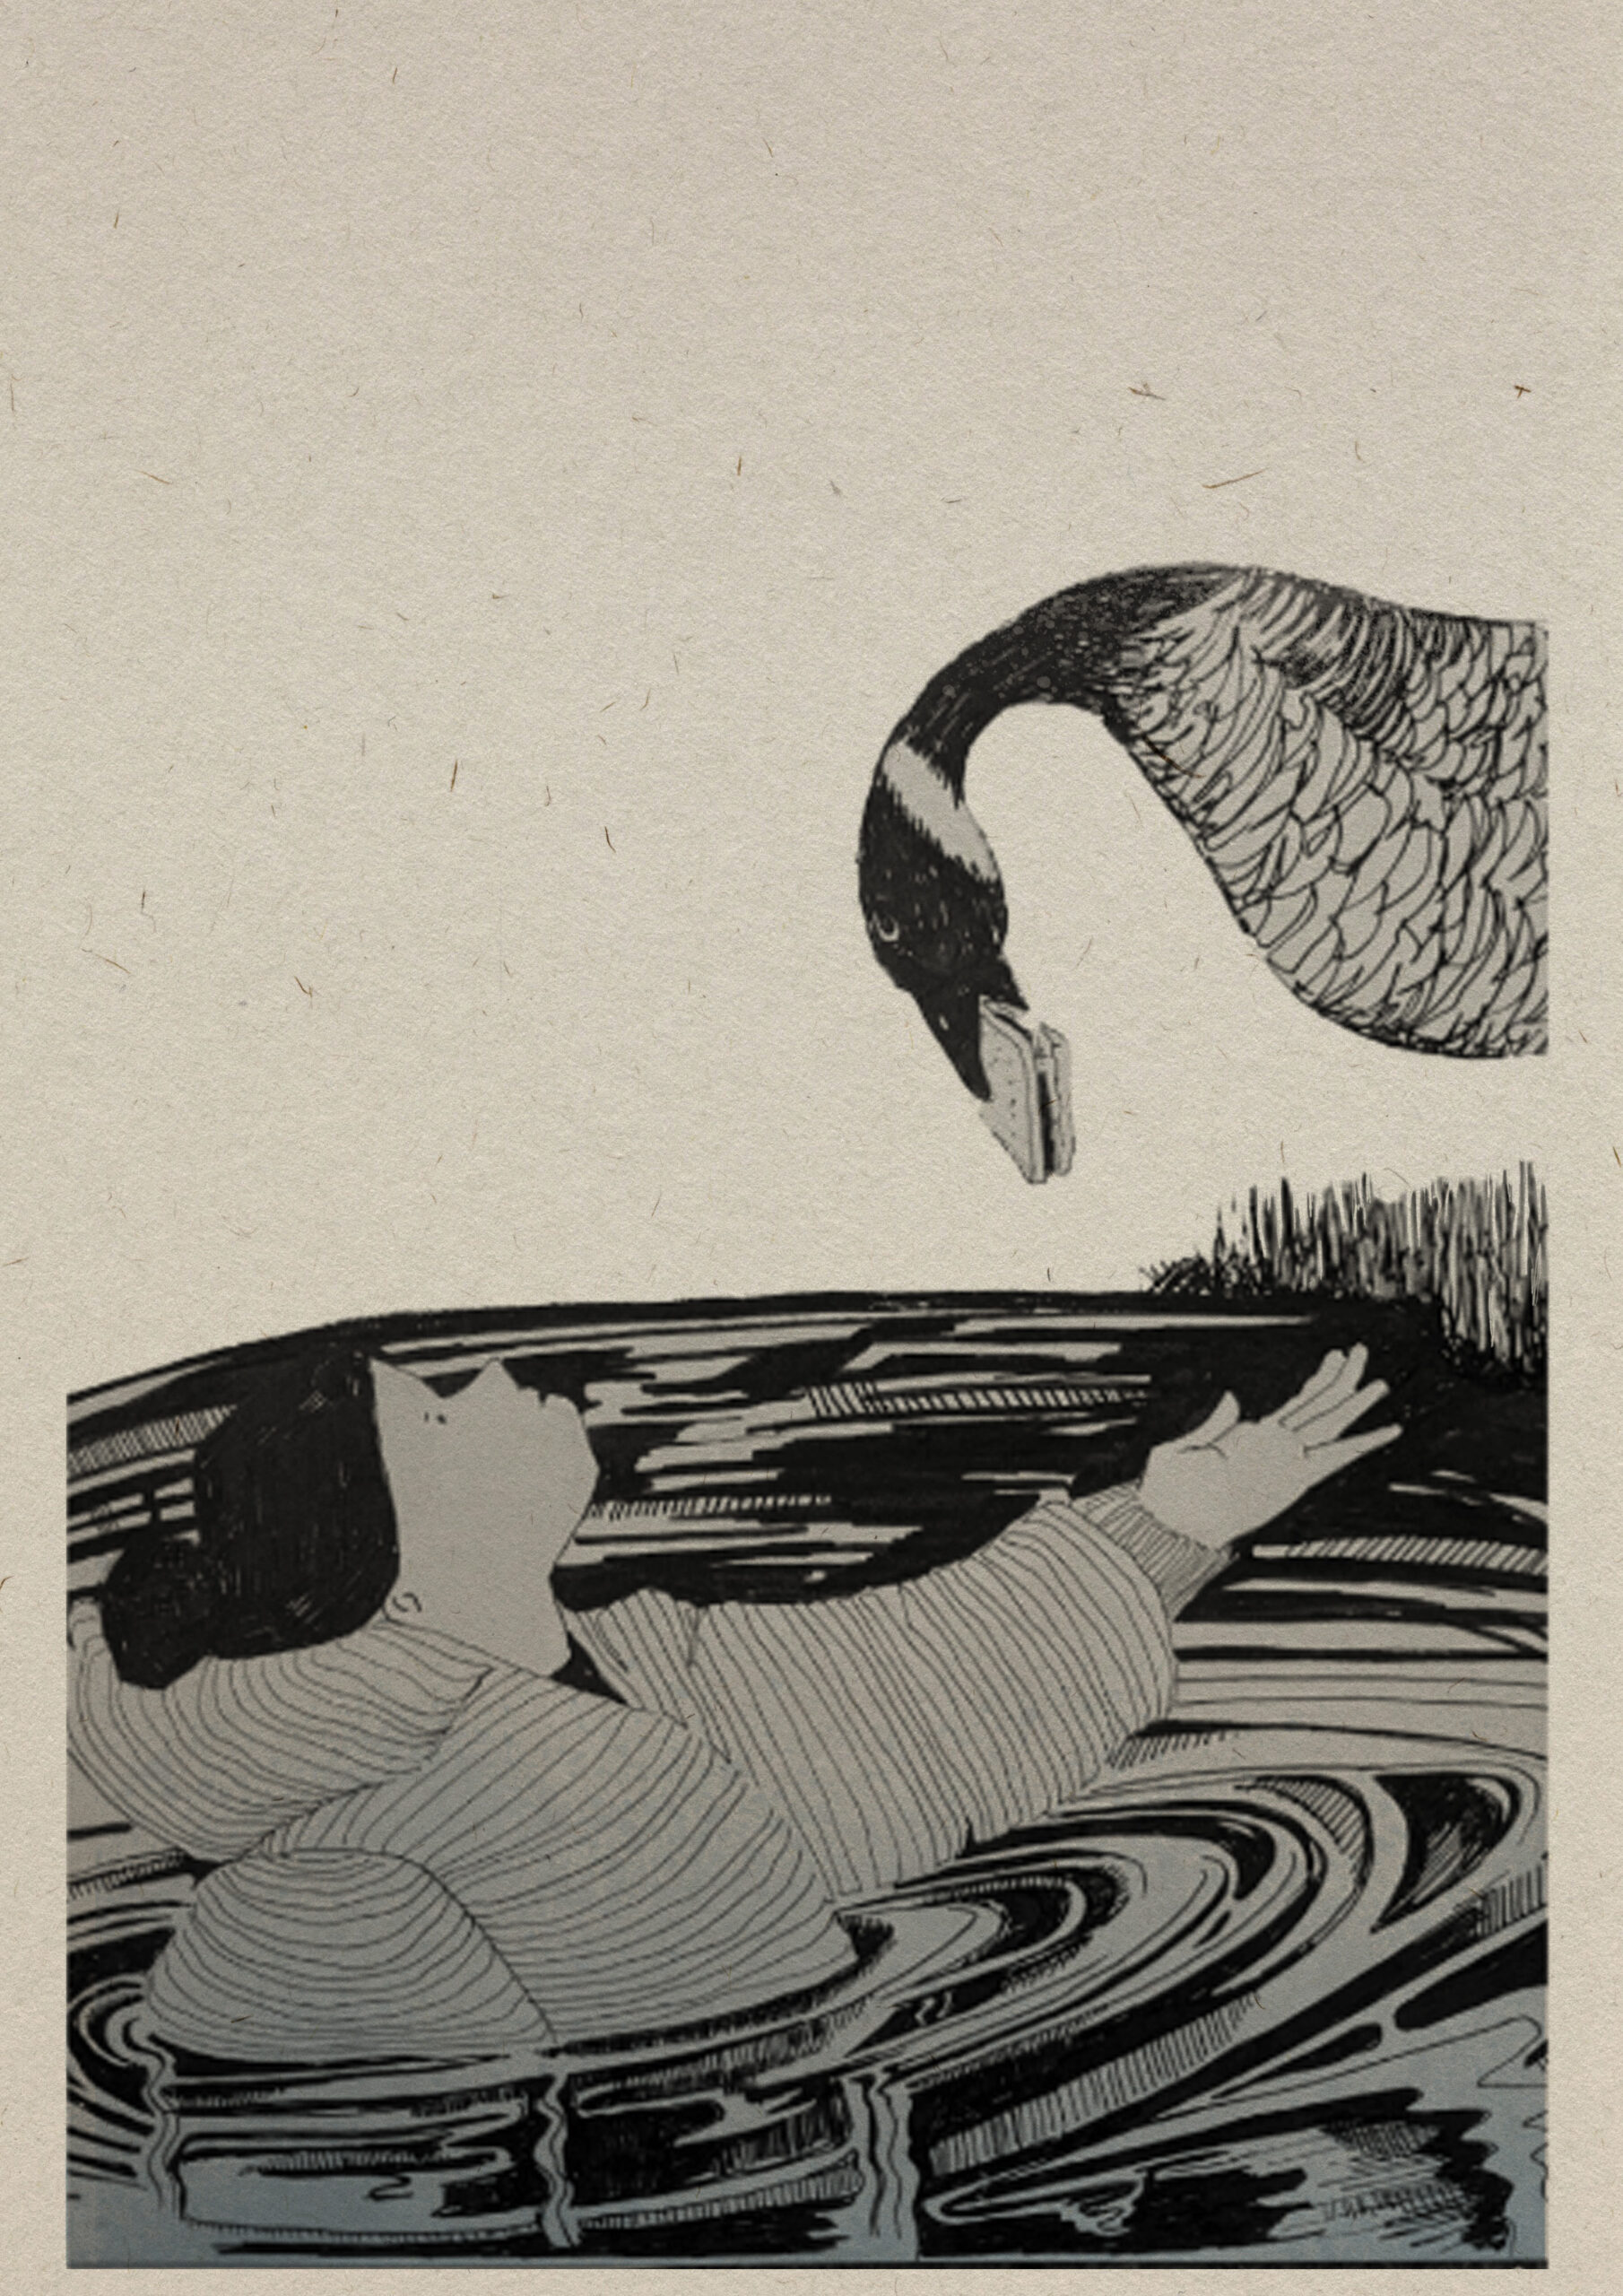 Pen and ink drawing of a woman in a lake reaching toward a goose on the bank. The goose has a sandwich in its beak